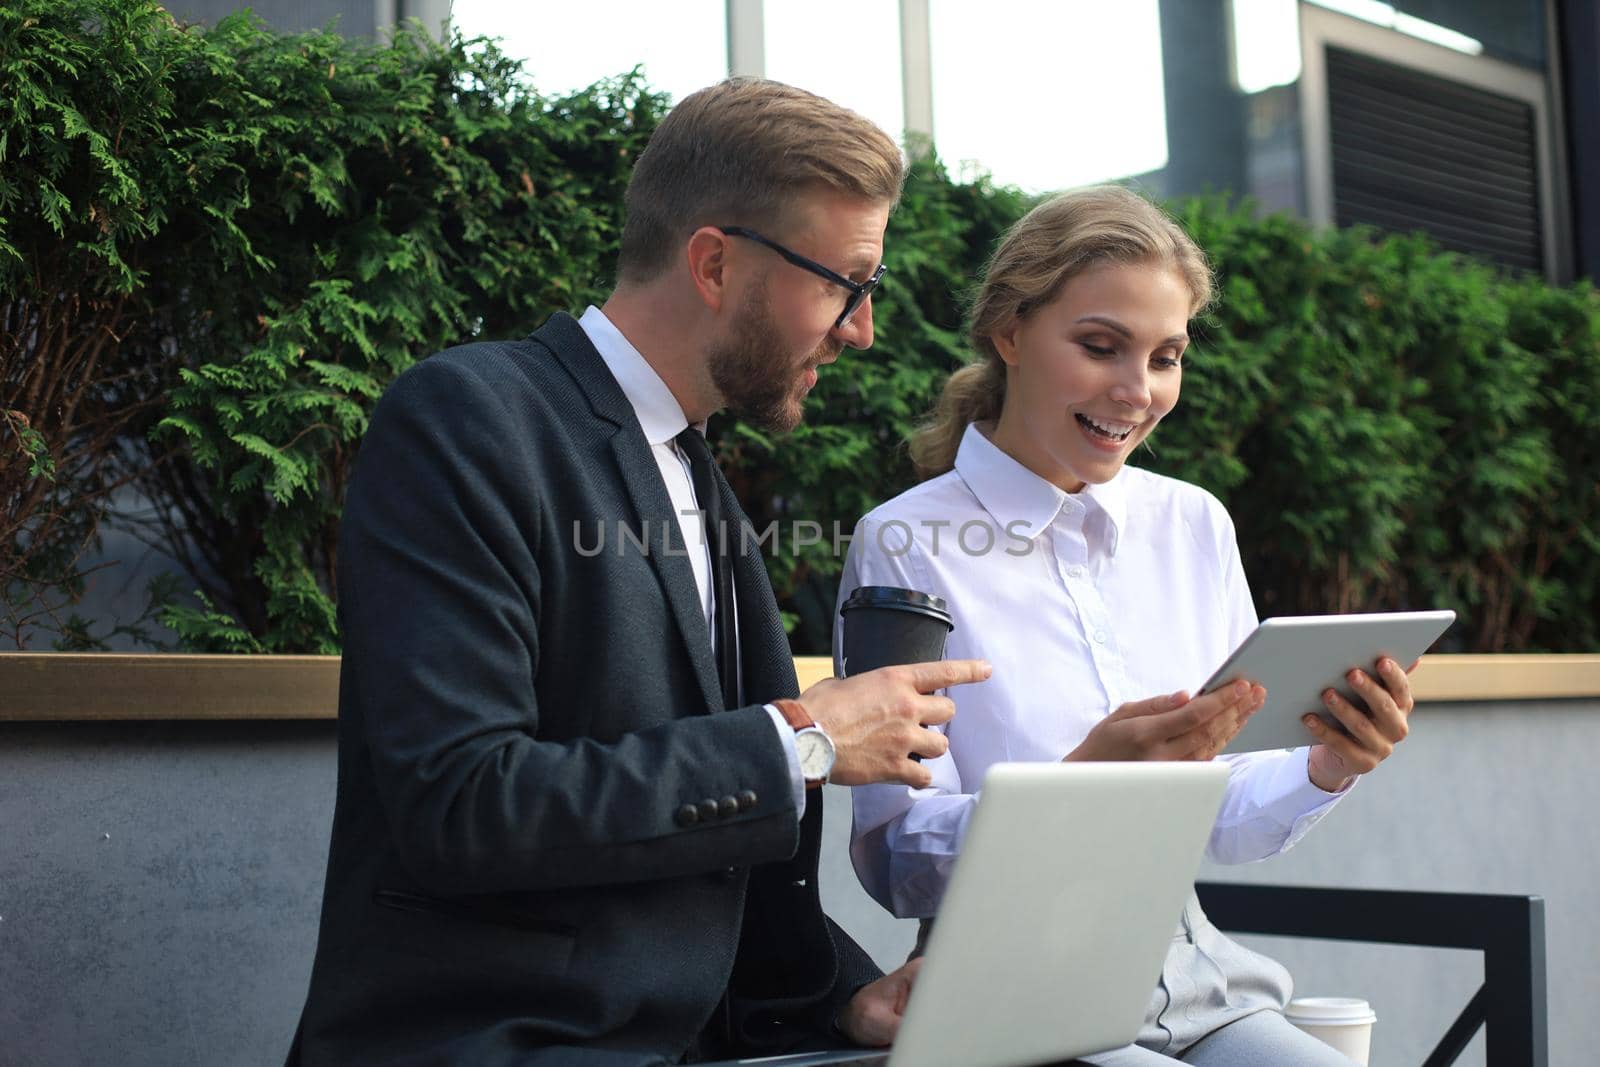 Office colleagues using laptop computer while sitting on a bench outdoors